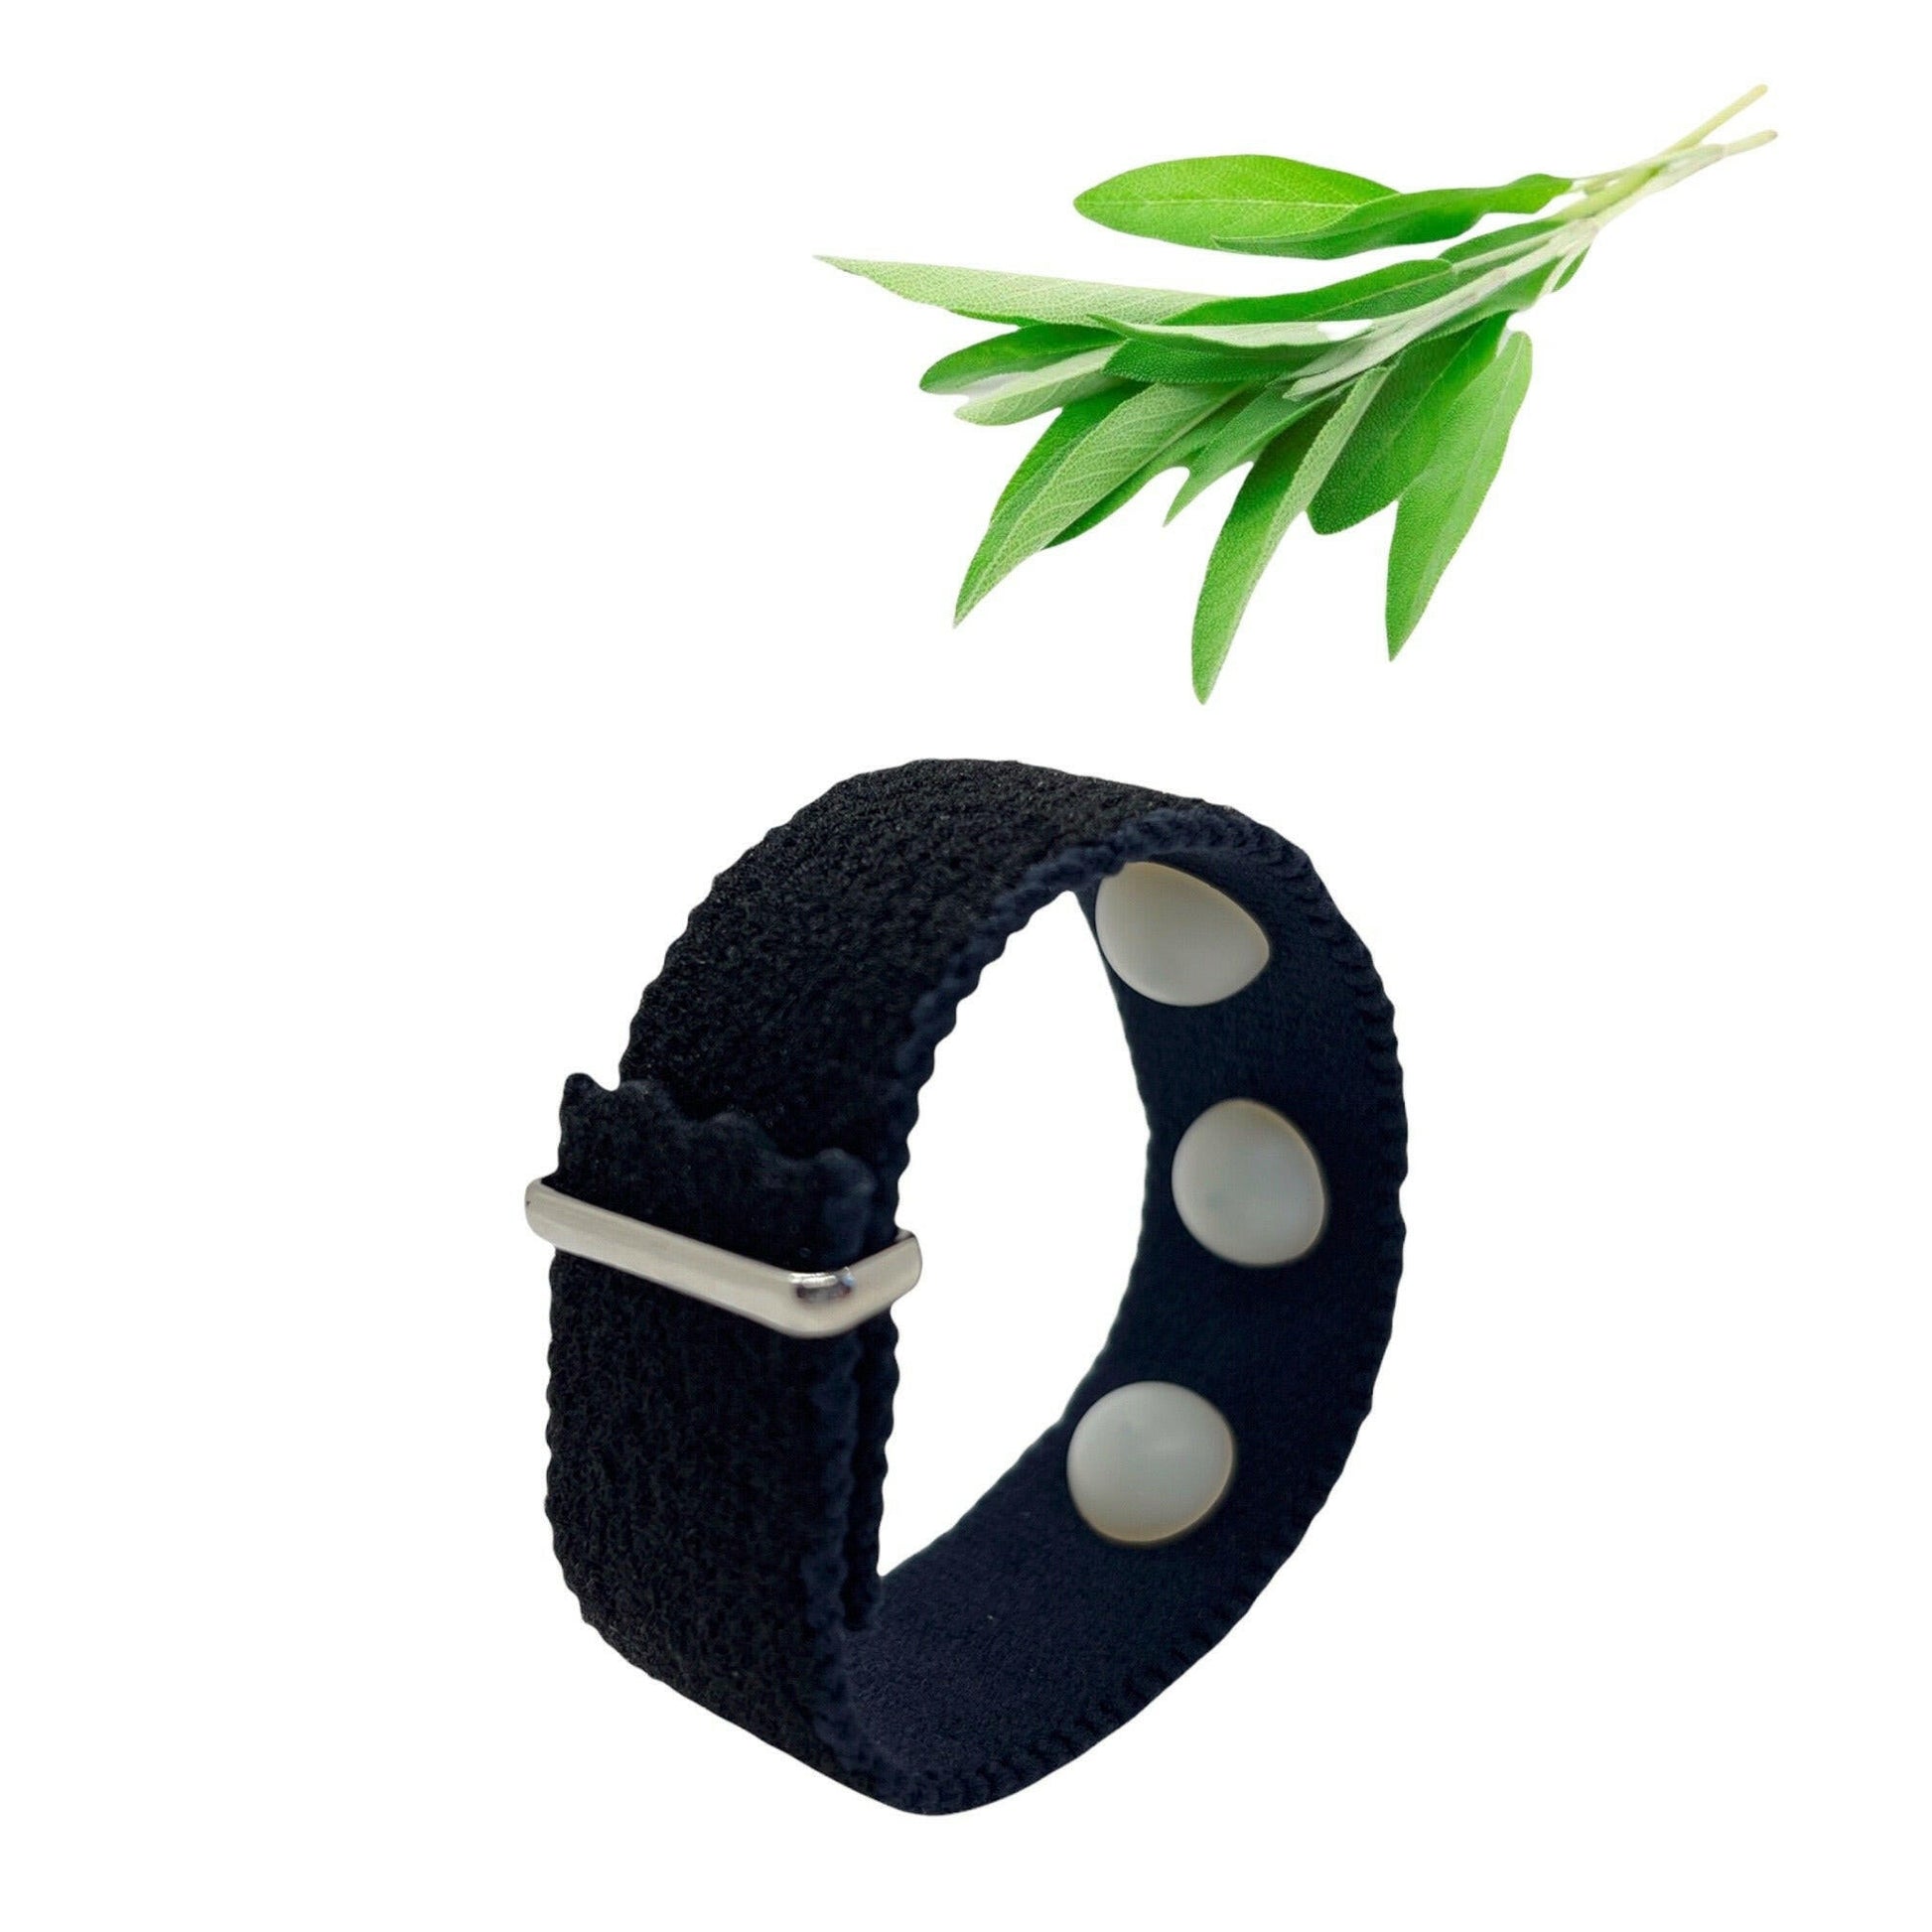 Menopause Multi Symptom Relief Acupressure Bracelet-Clary Sage Scented Adjustable Band- Reduces Hot Flashes, Sleeplessness, Night Sweats and Stress - Acupressure Bracelets